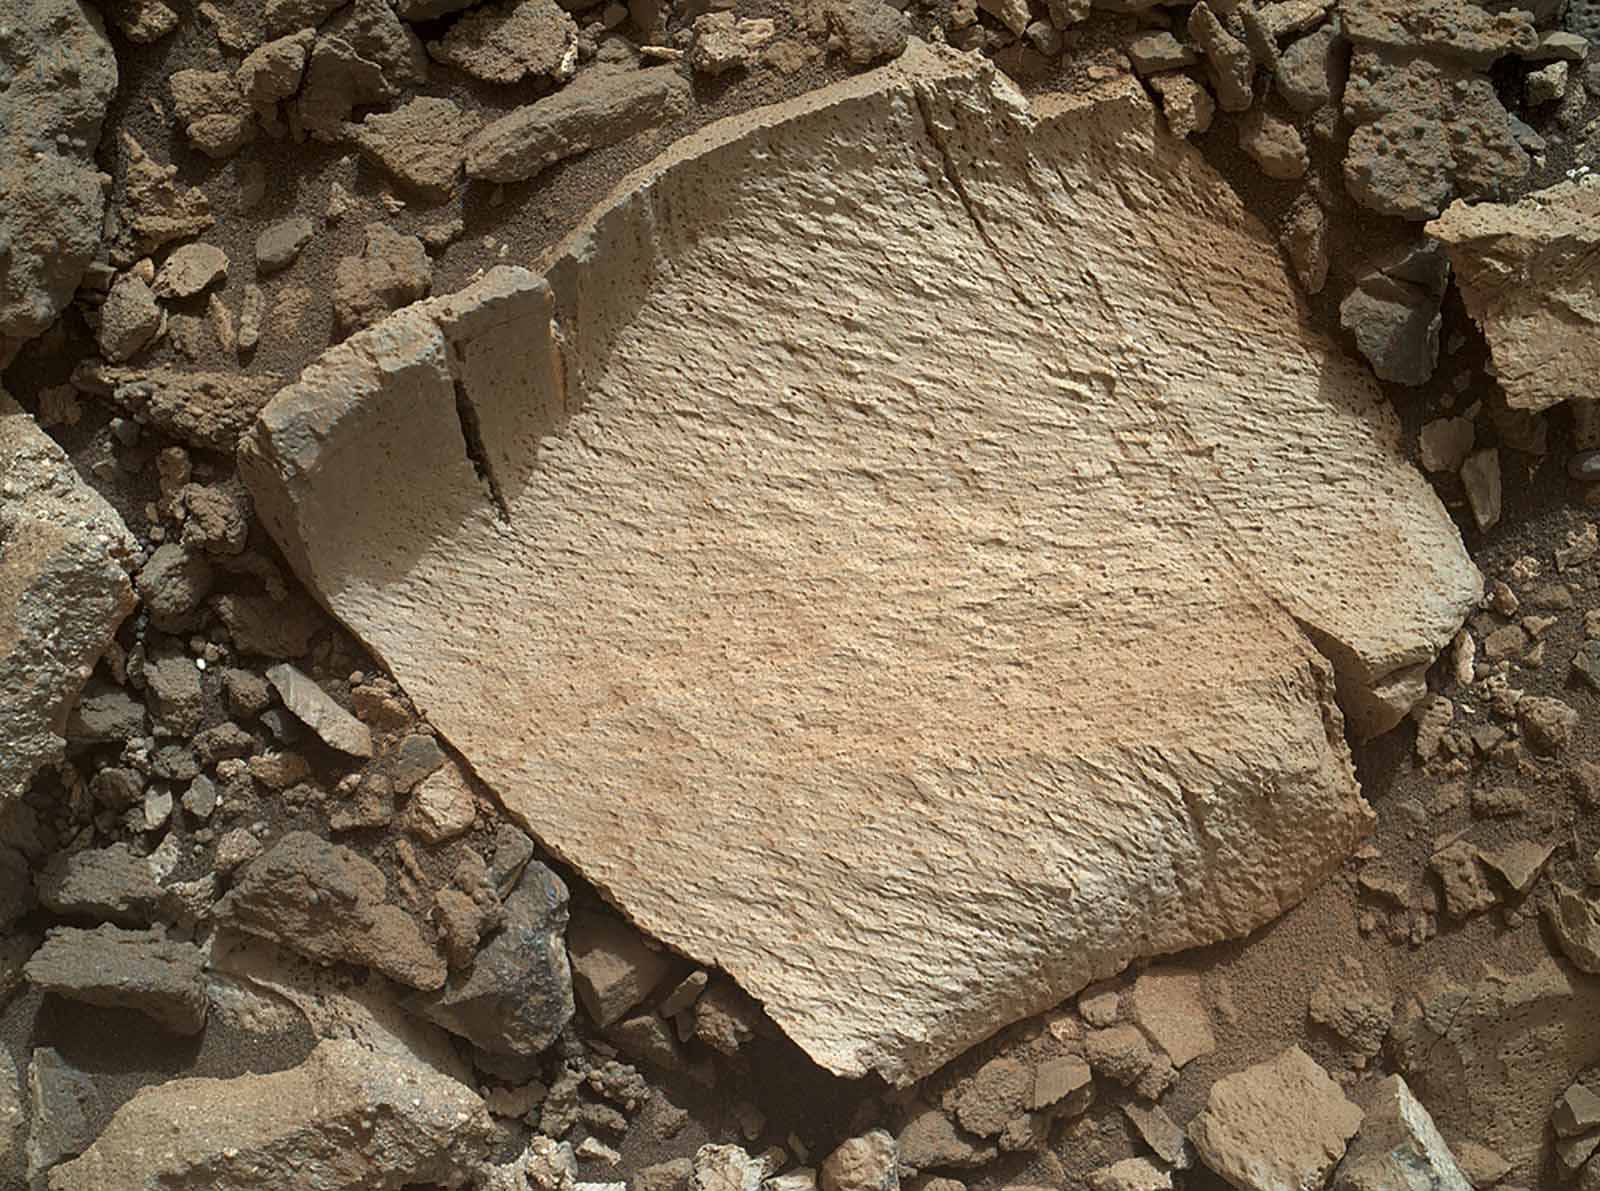 A rock from the deepest part of the ancient Martian lake